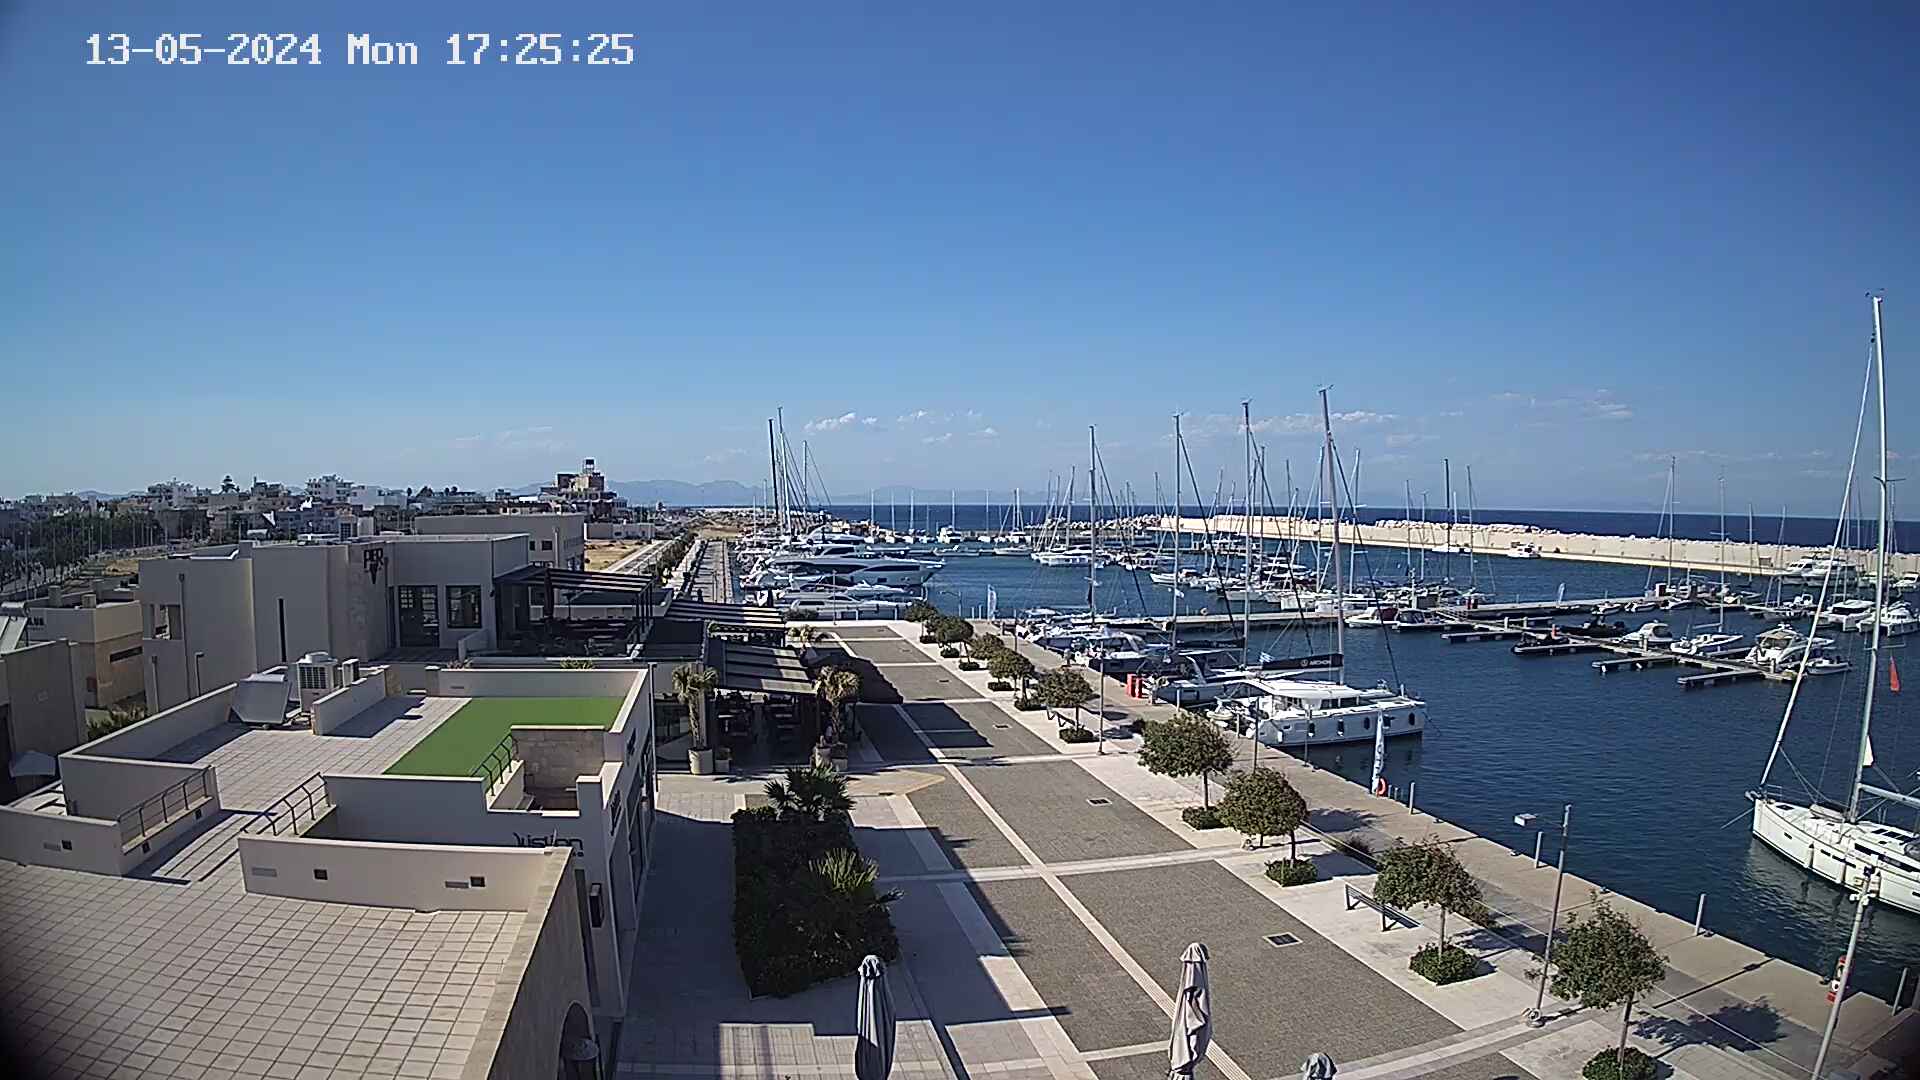 Rhodos Stadt Mo. 17:26